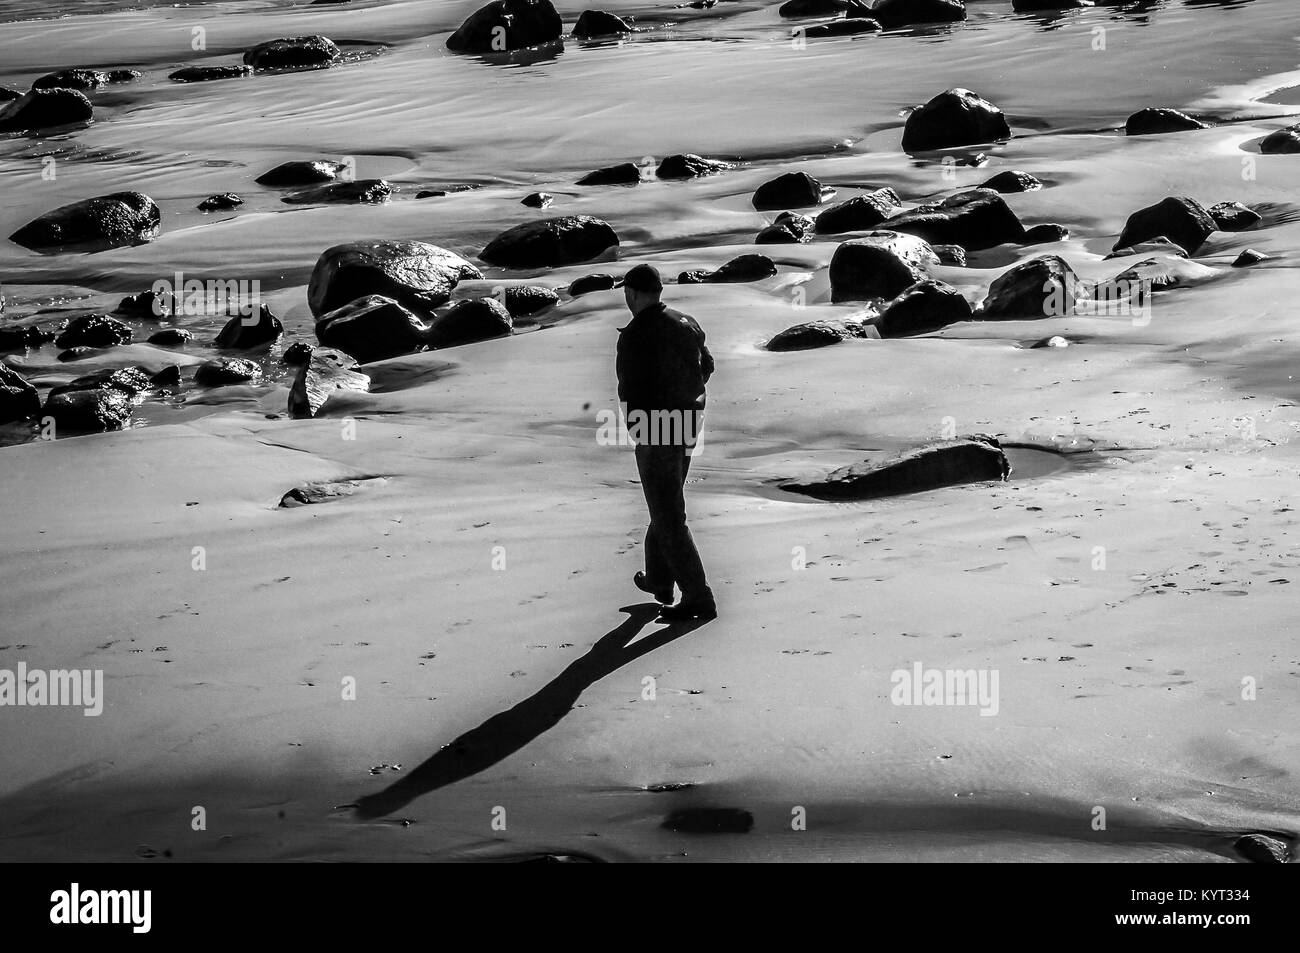 After a week of a Blizzard,and sub zero temperatures. This man takes a walk in the Sun on the beach. The forecast is for more cold,and snow tomorrow. Stock Photo